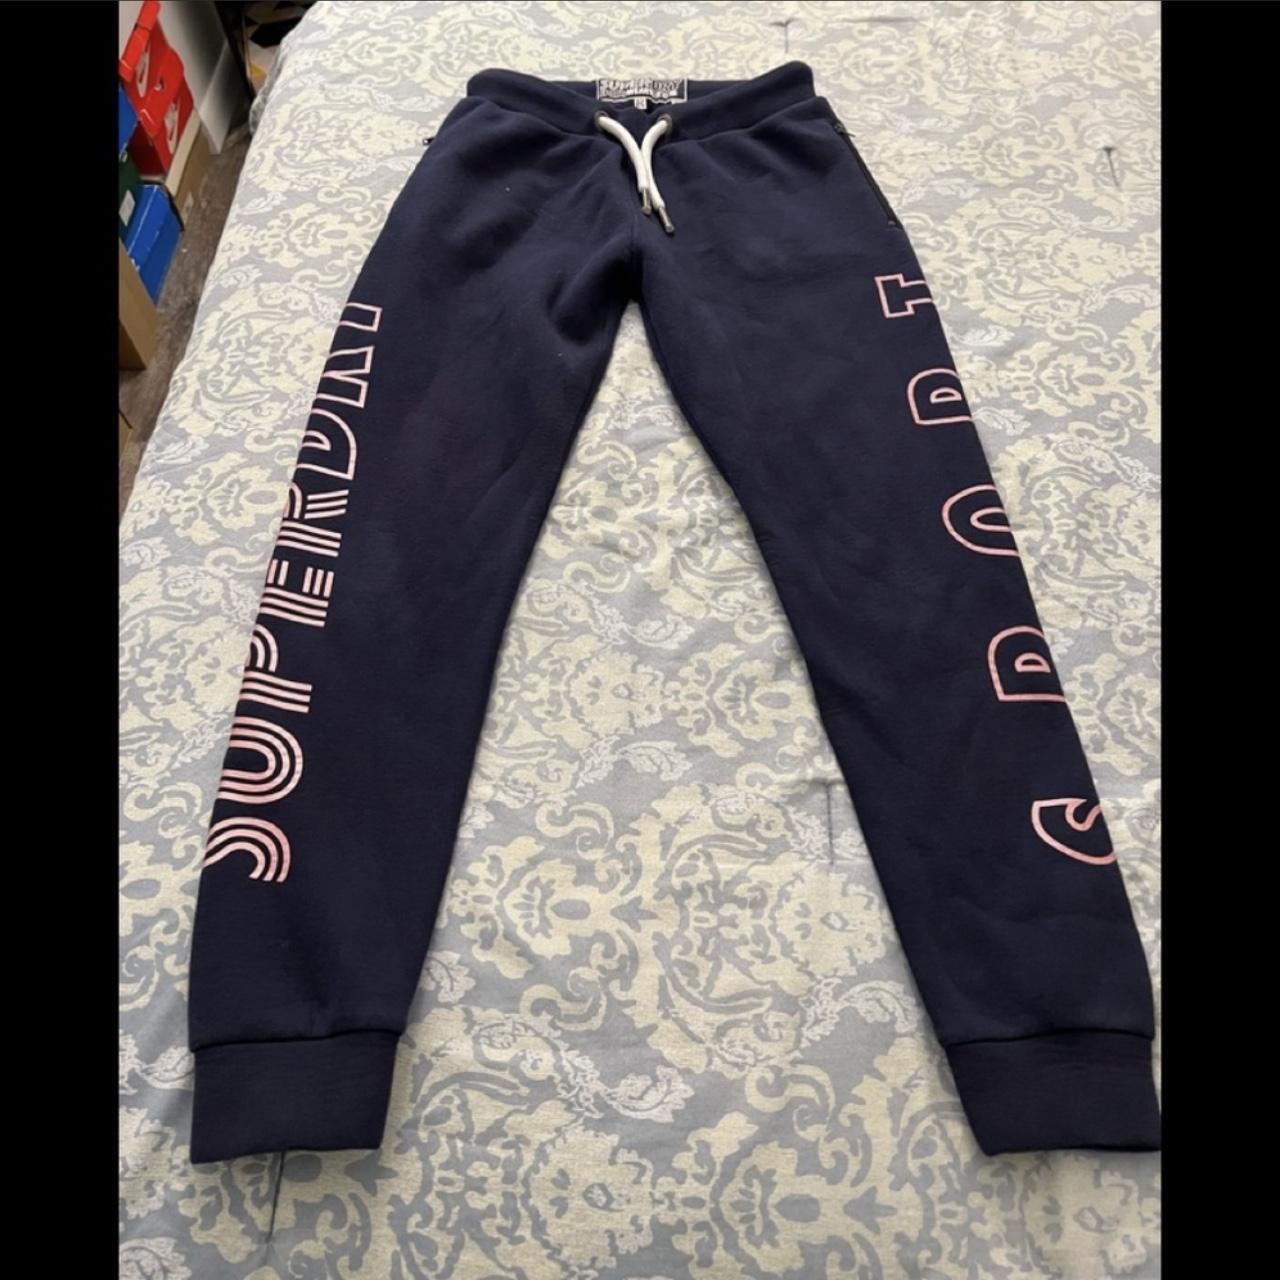 Superdry Women's Navy and Pink Joggers-tracksuits